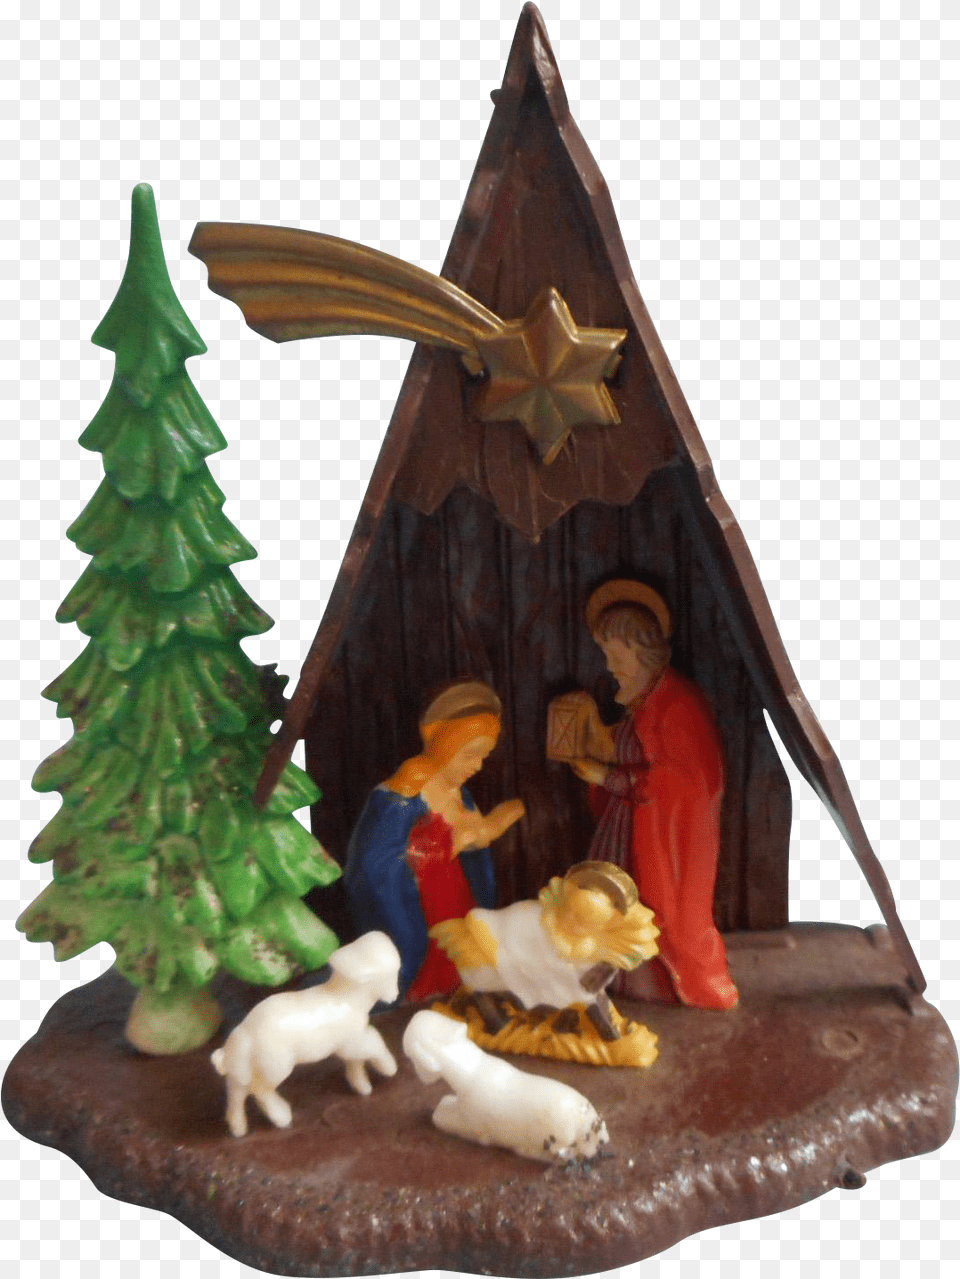 Vintage A Frame Nativity Christmas Ornament Plastic Christmas Tree, Figurine, Adult, Person, Man Png Image